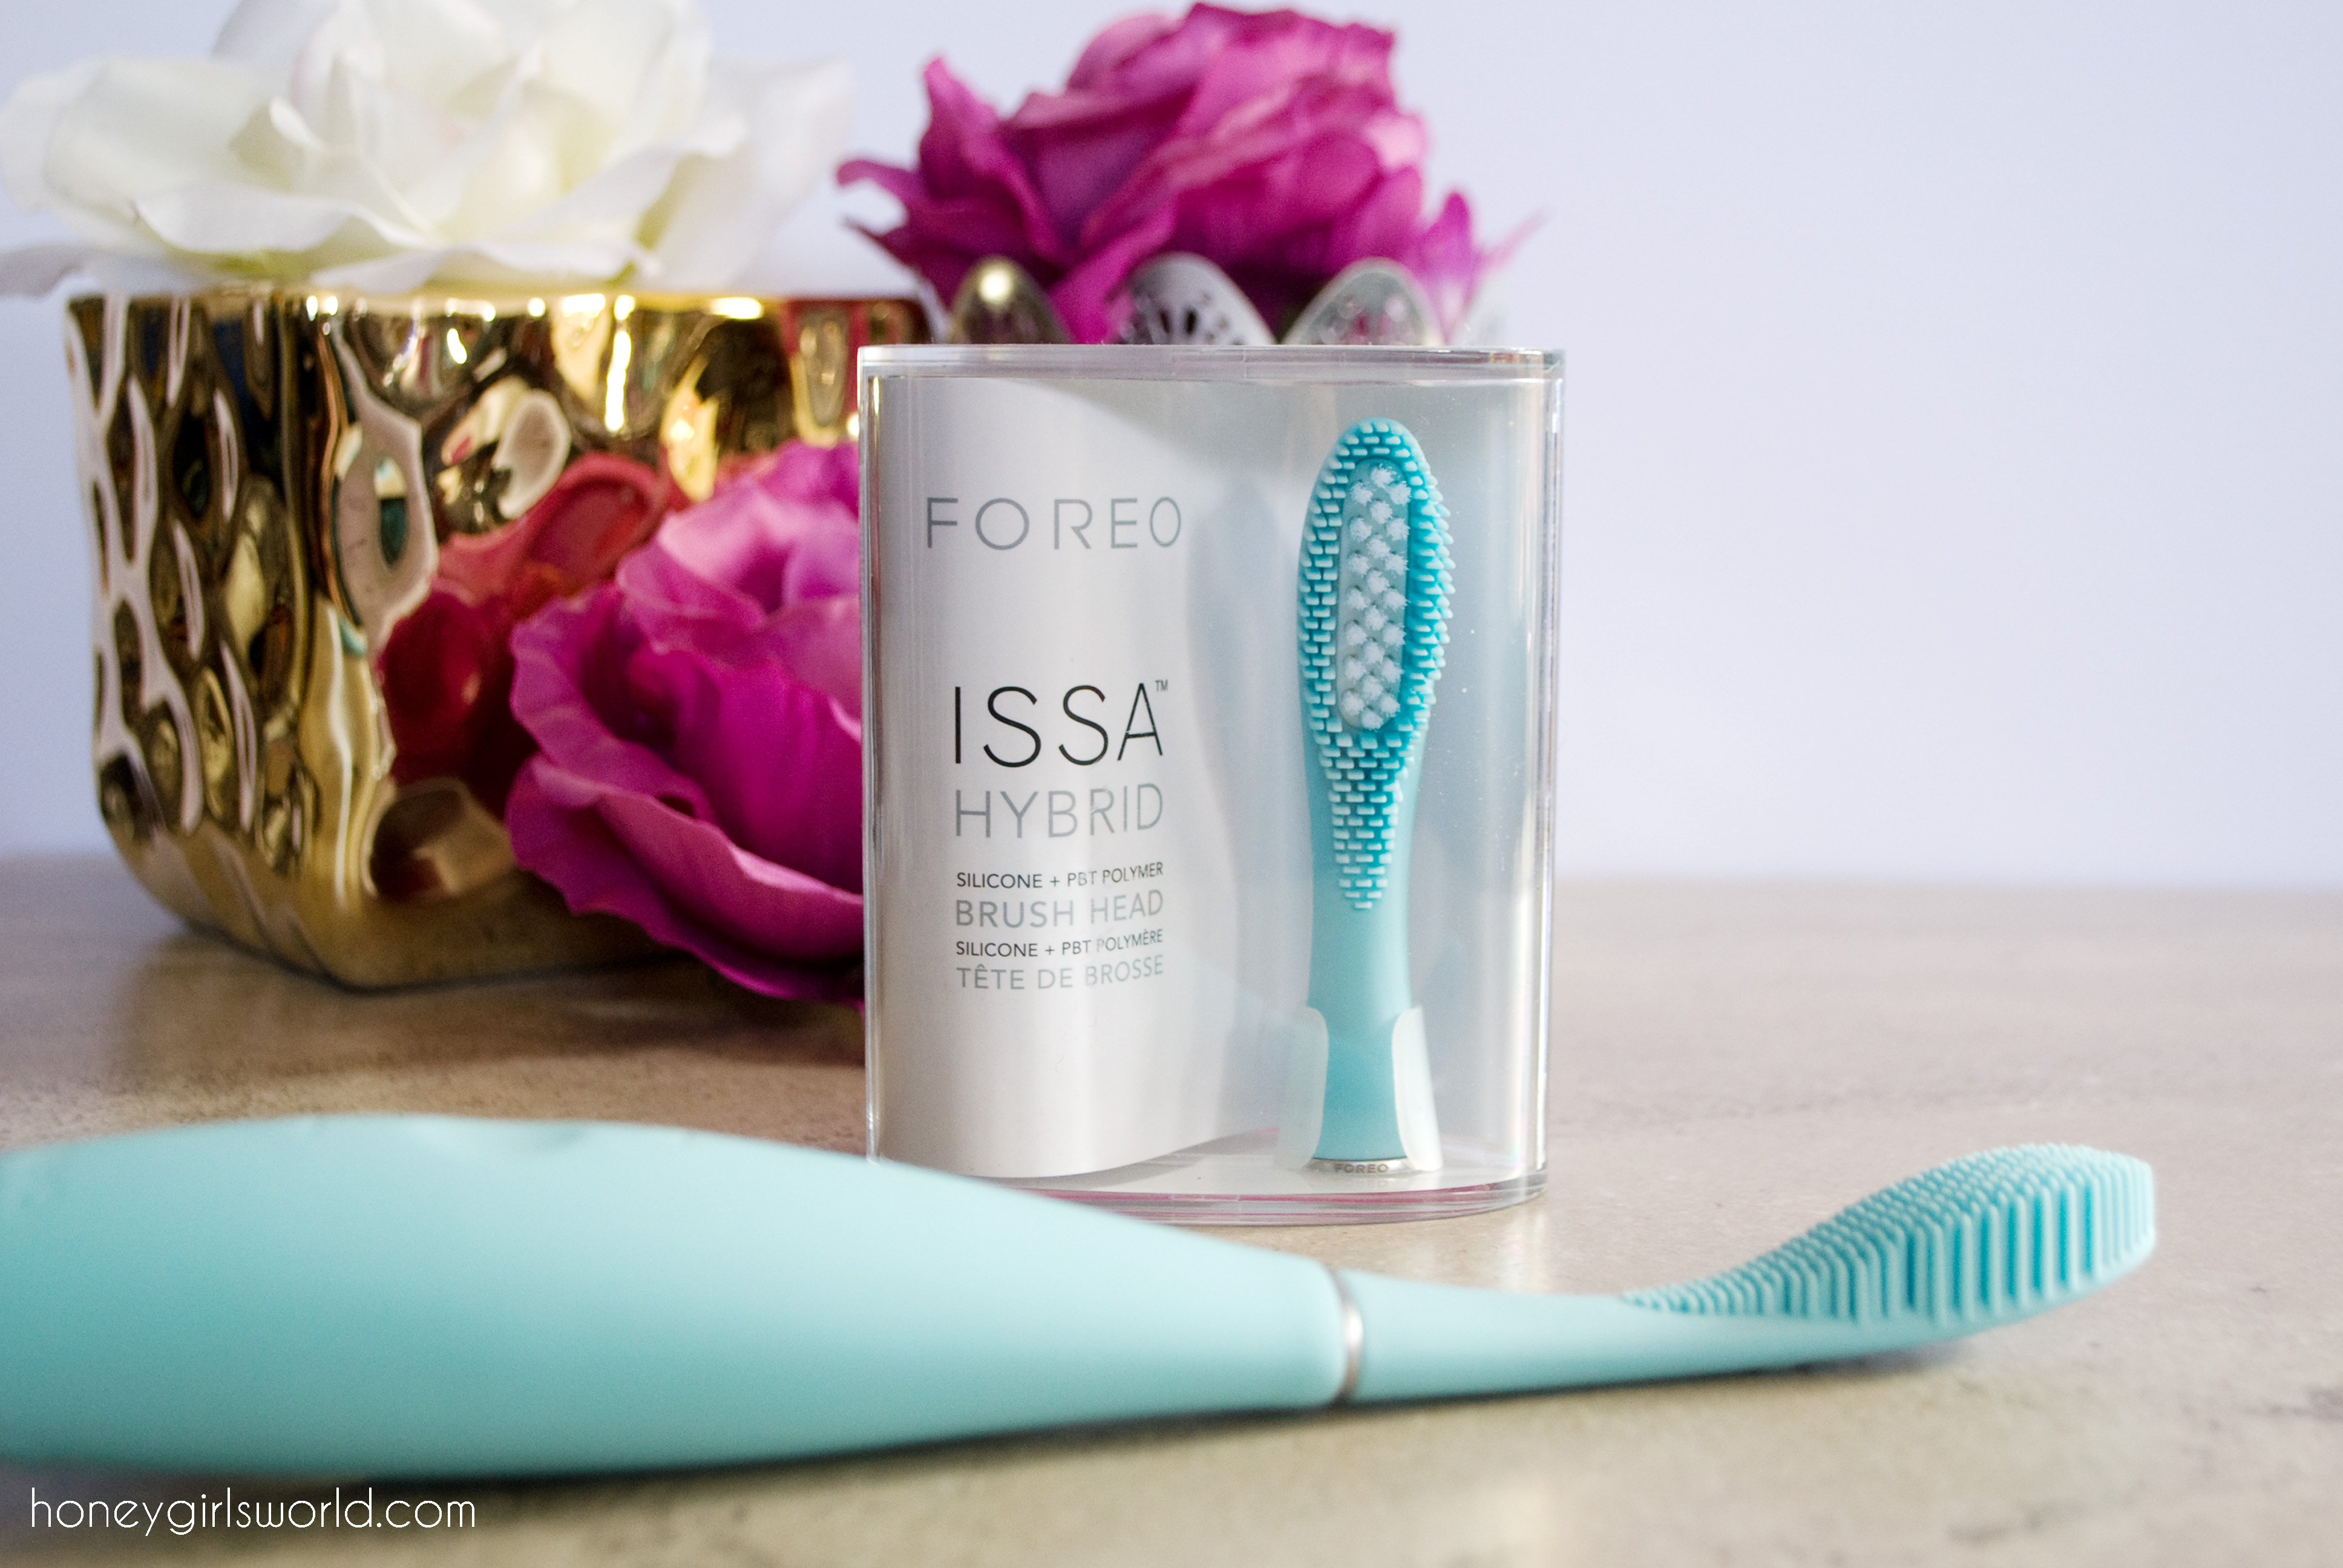 foreo, foreo ISSA, Foreo ISSA Hybrid, toothbrush, dental hygiene, cleansing, tooth cleaning, Foreo ISSA Hybrid brush head, 